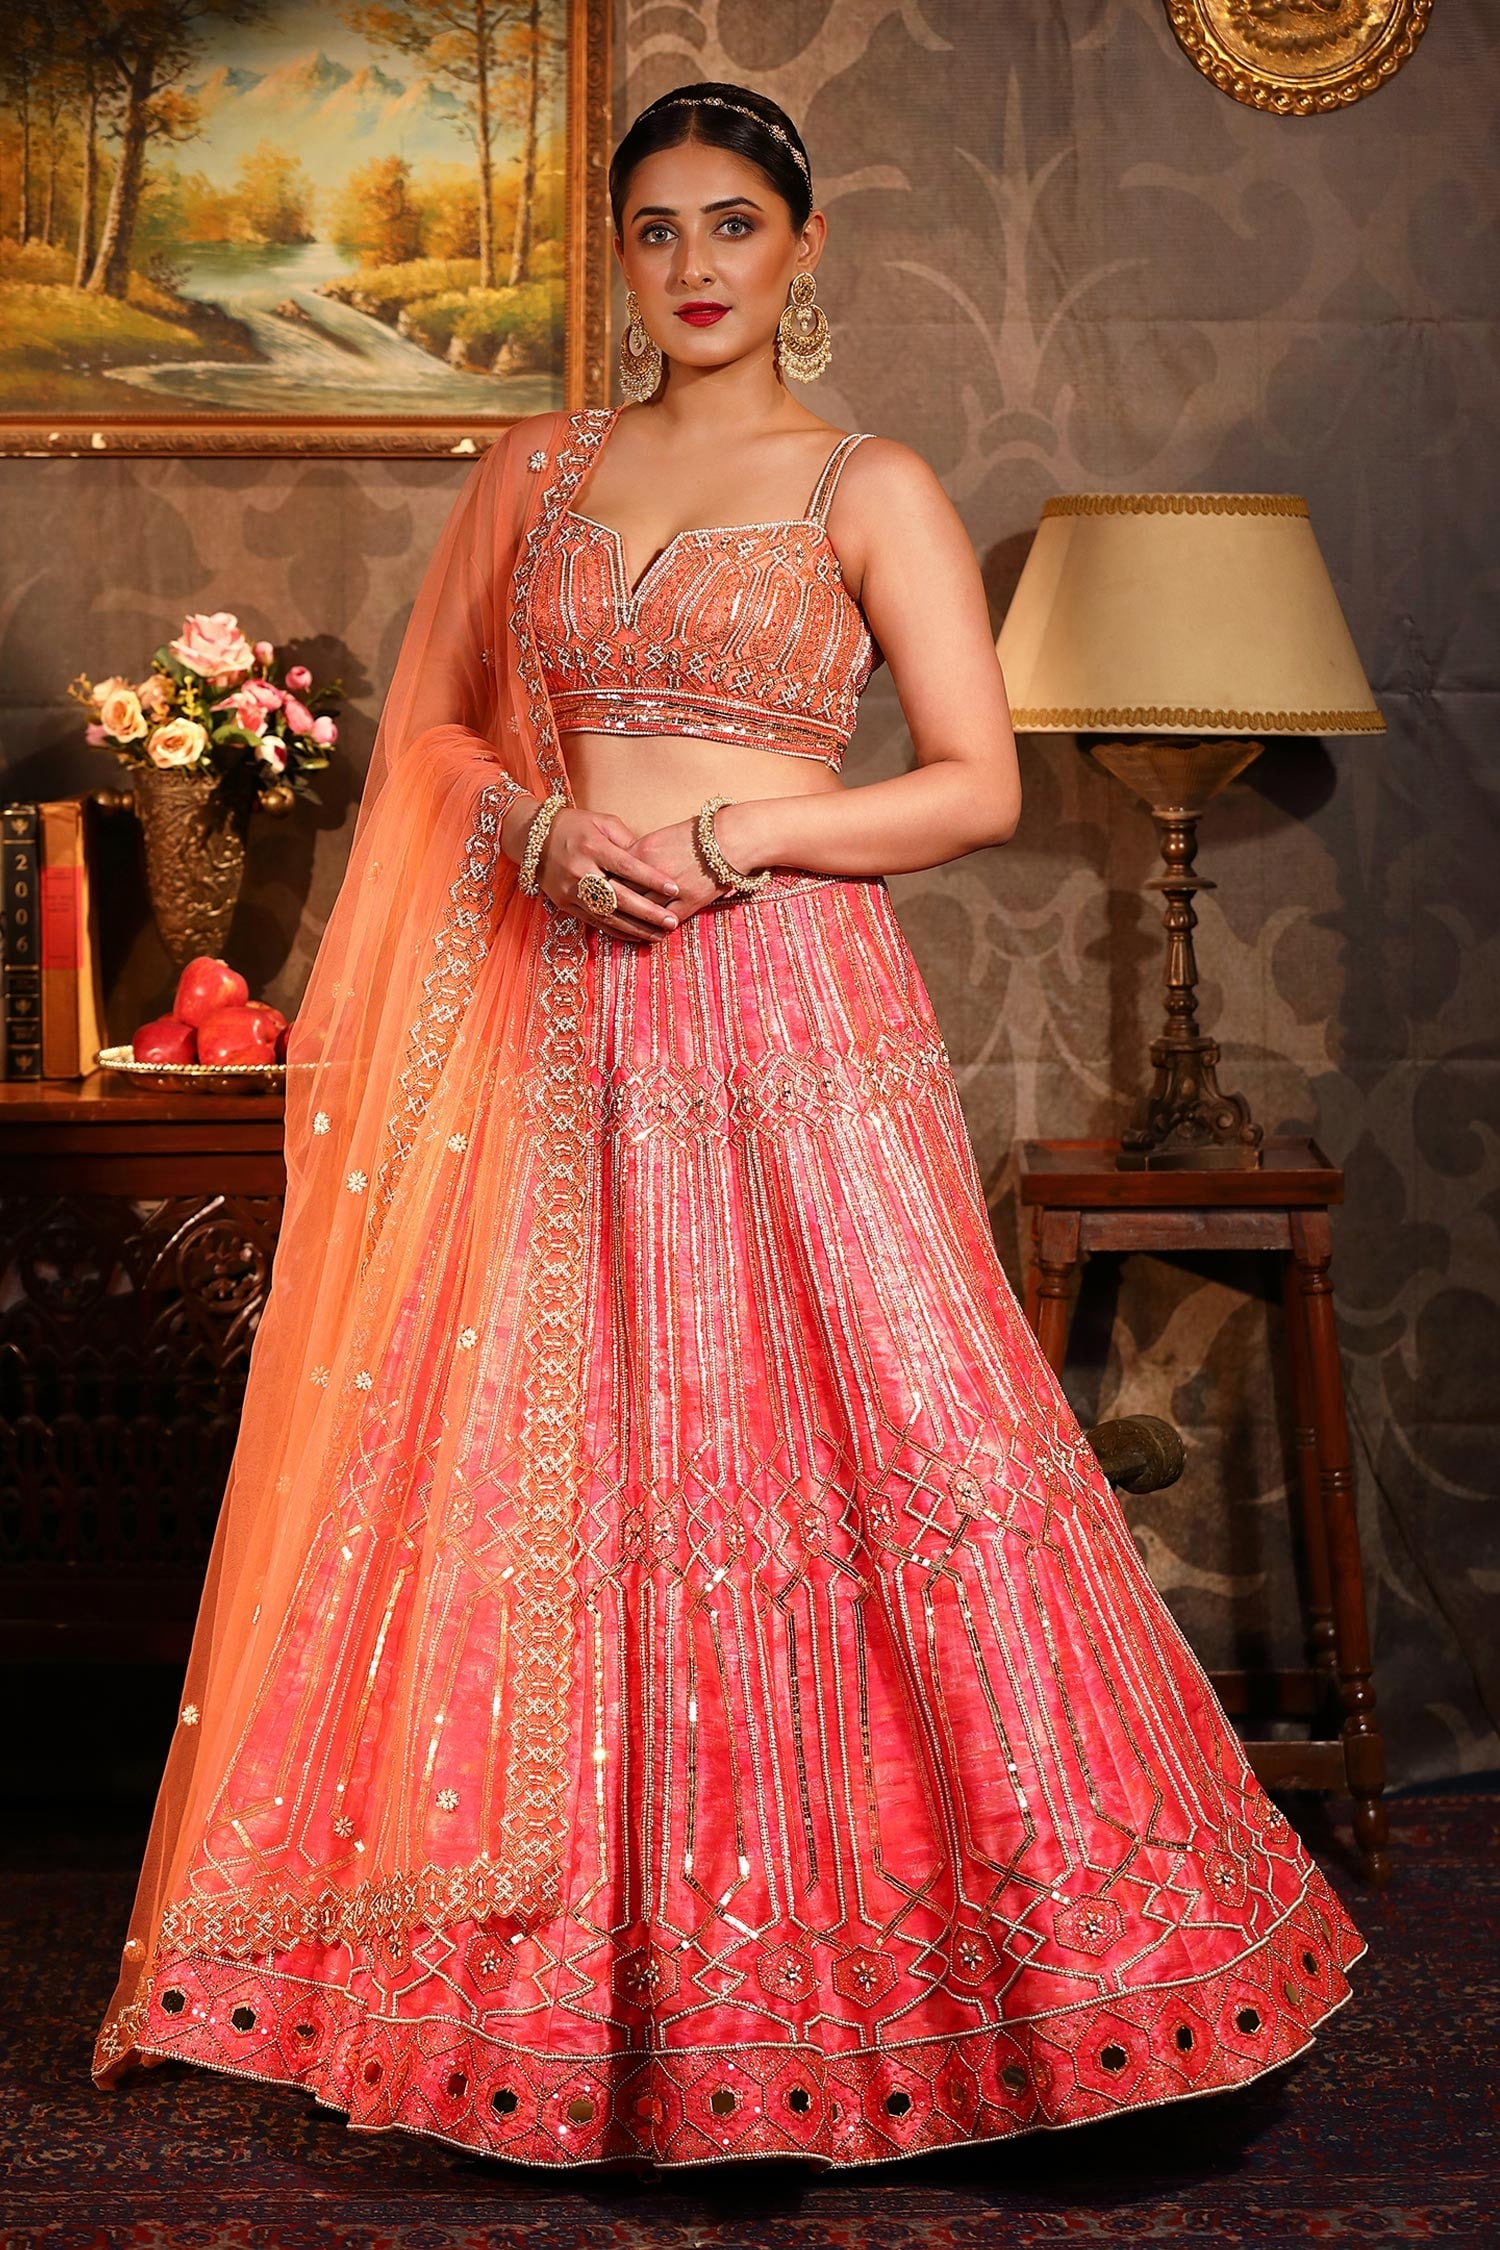 Laxmishriali Coral Lehenga And Blouse - Dupion Print & Embroidery The Imperial Set For Women